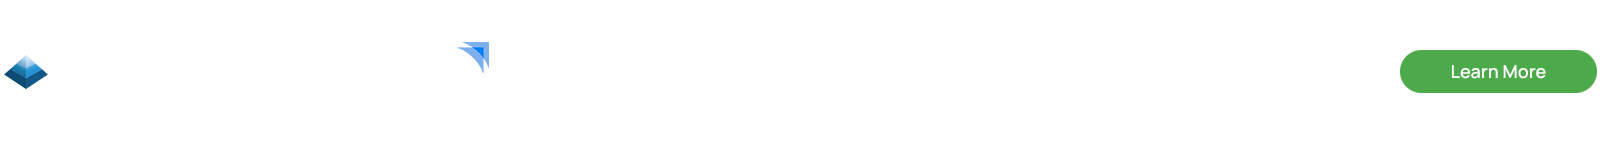 Equilar and Intapp Partner to Enhance Relationship Intelligence and Accelerate Business Development Efforts